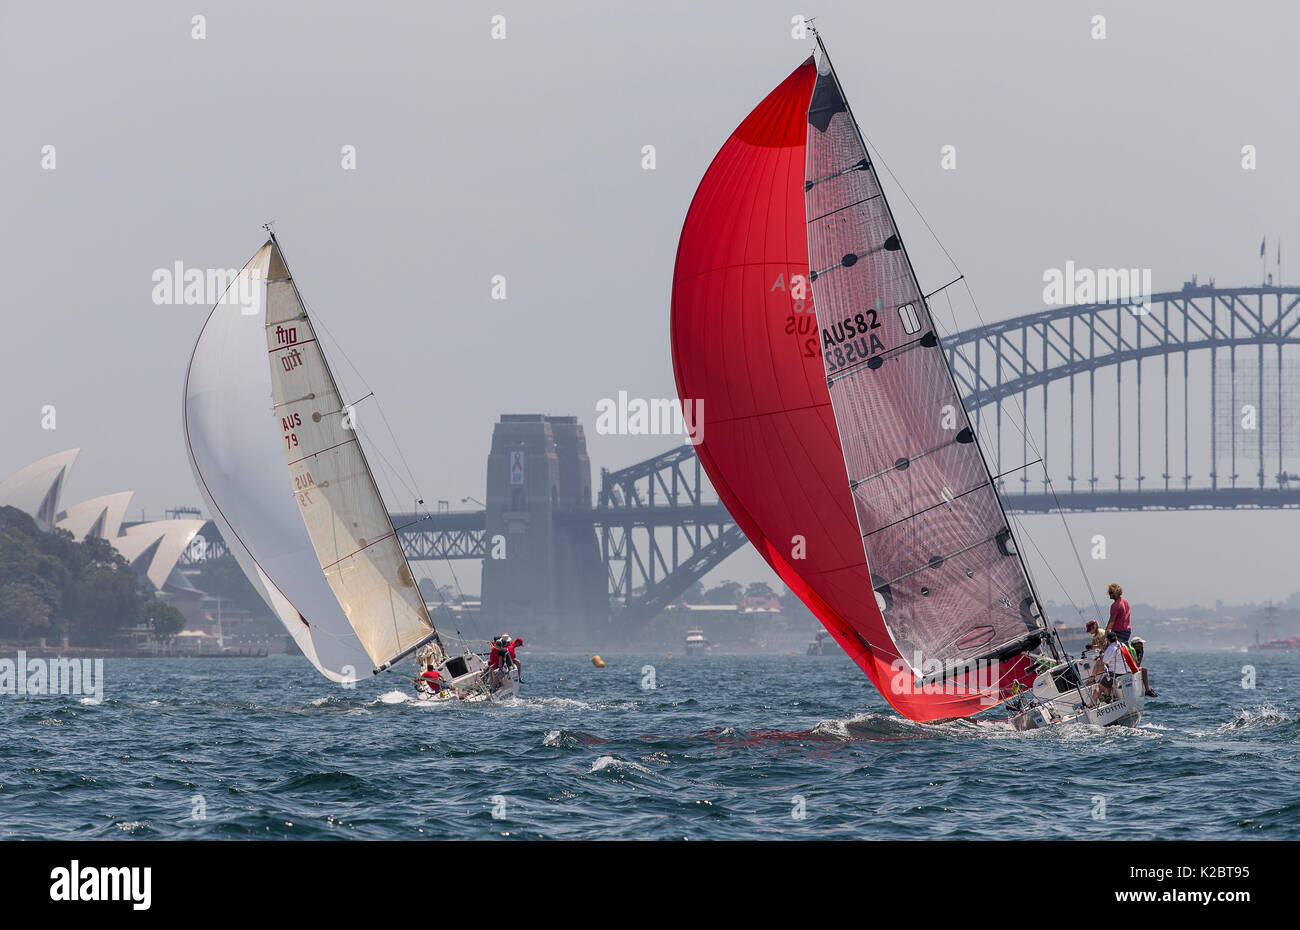 Sailboats with spinnakers out, racing in the Sydney Harbour, New South Wales, Australia, October 2012. All non-editorial uses must be cleared individually. Stock Photo